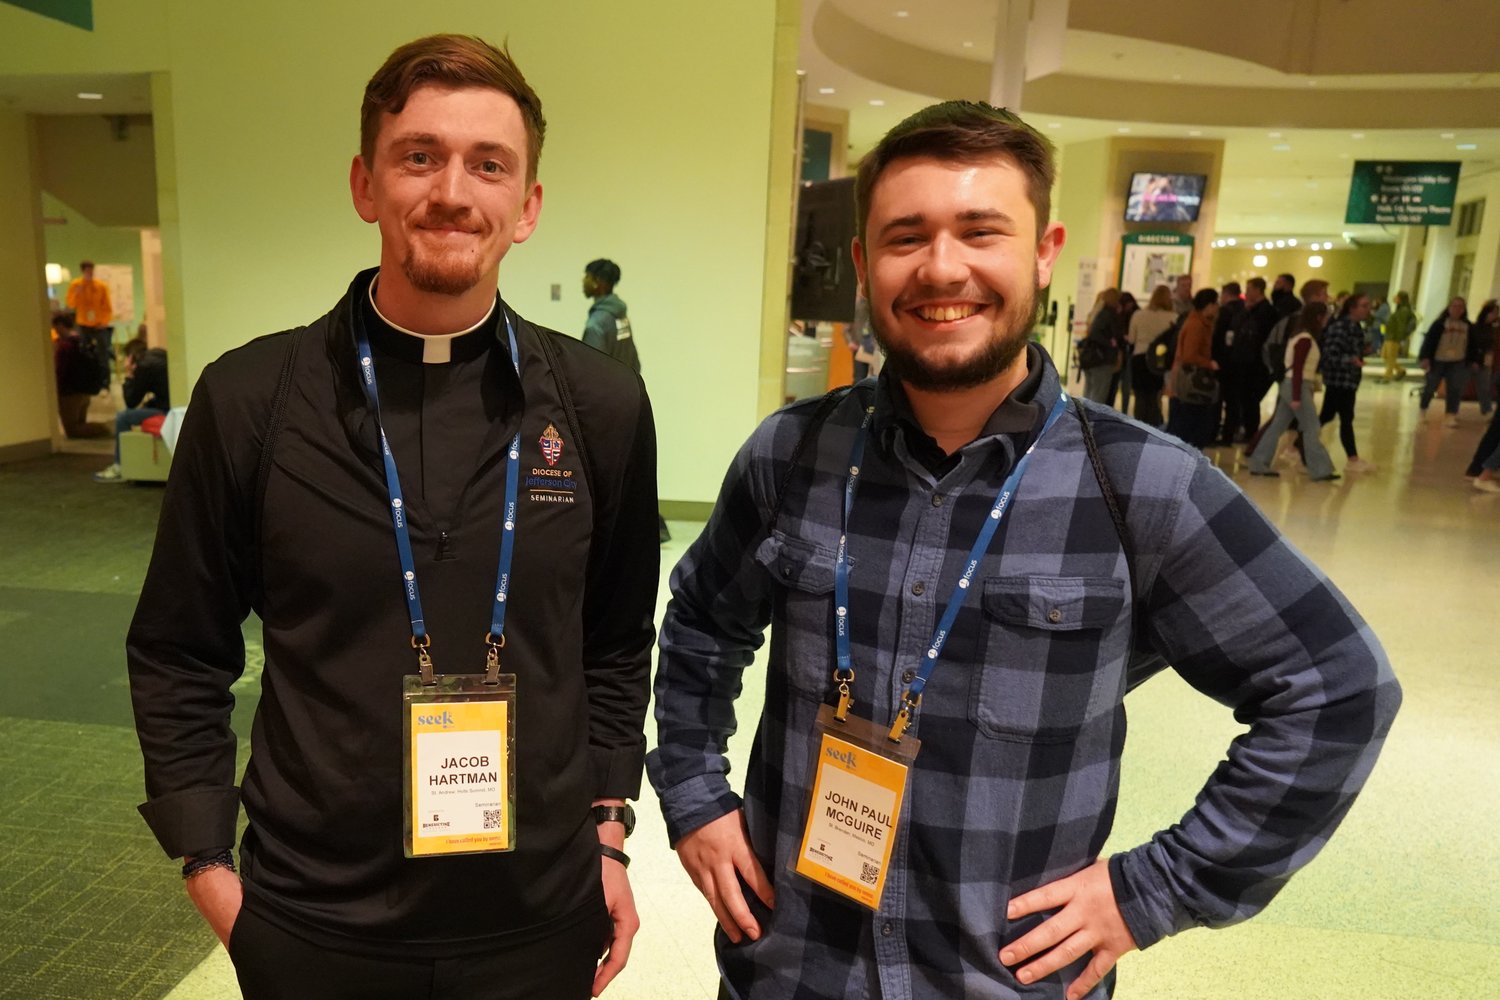 Seminarians Jacob Hartman and John Paul McGuire of the Jefferson City diocese took part in a special track for seminarians at the SEEK23 conference.